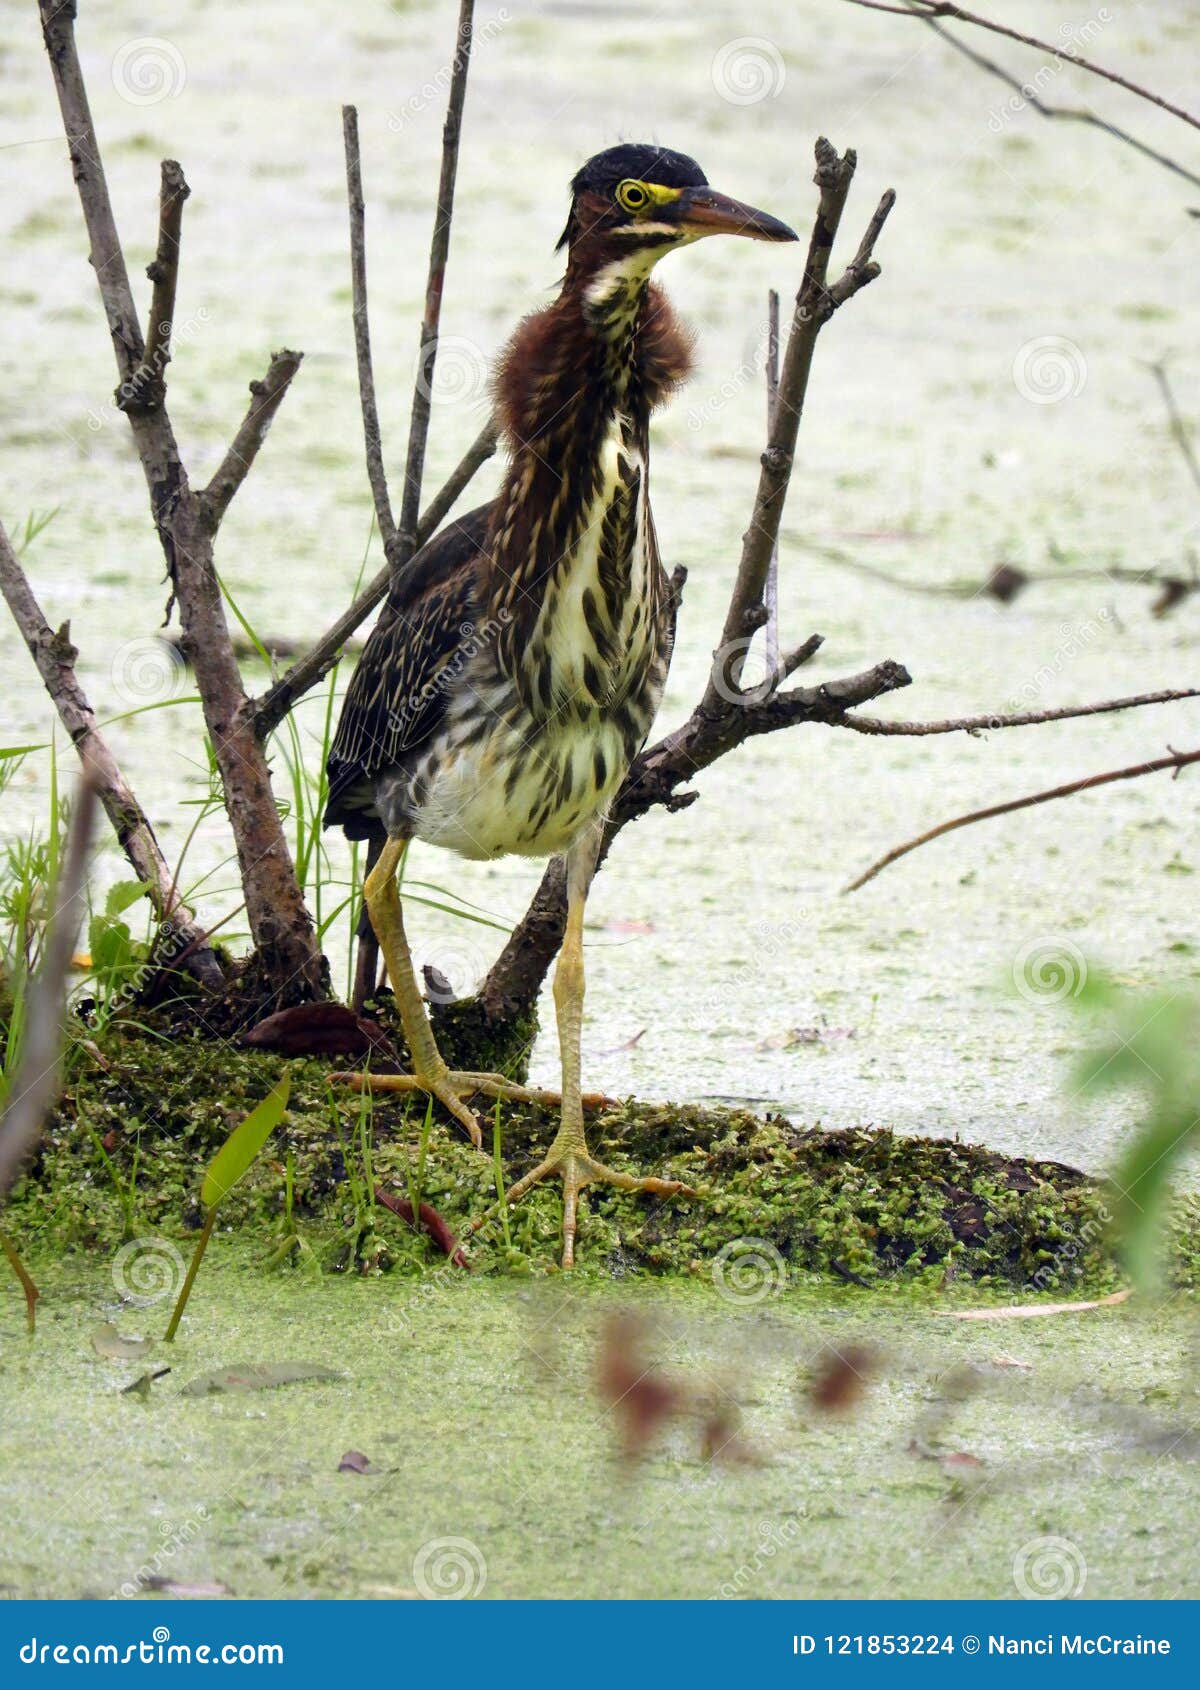 Green Heron Neck Outstretched during Hunting Stock Photo - Image of